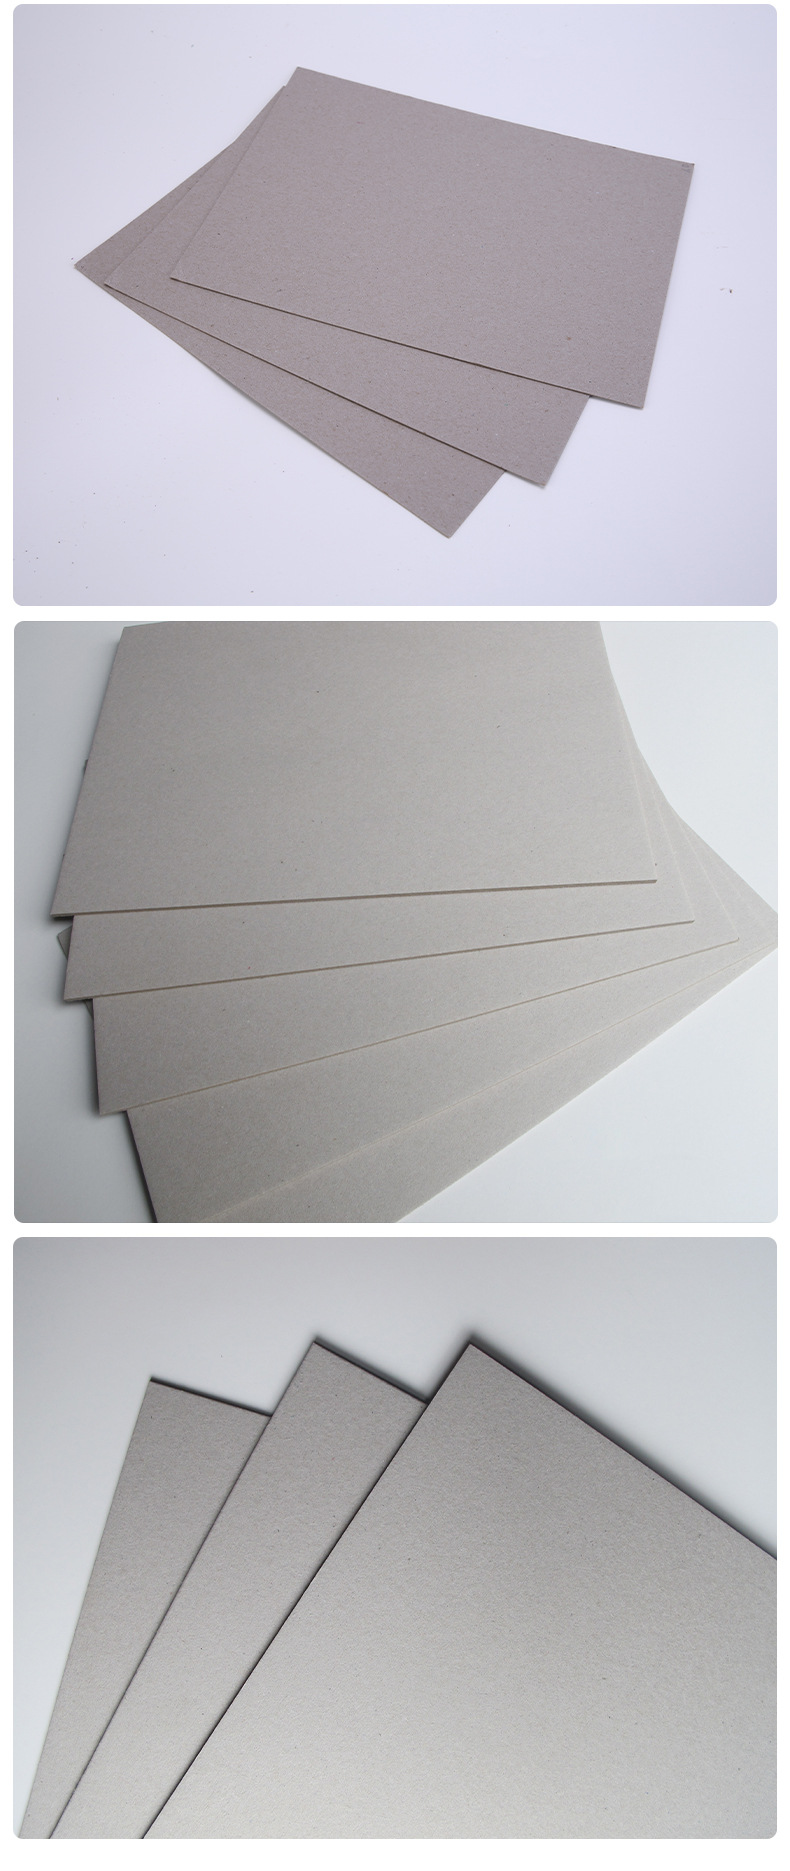 China Factory Luxury Packaging 1.5mm Gray Board Pull Paper Pink Sweets Chocolate Gift Box na may Ribbon Handle (10)